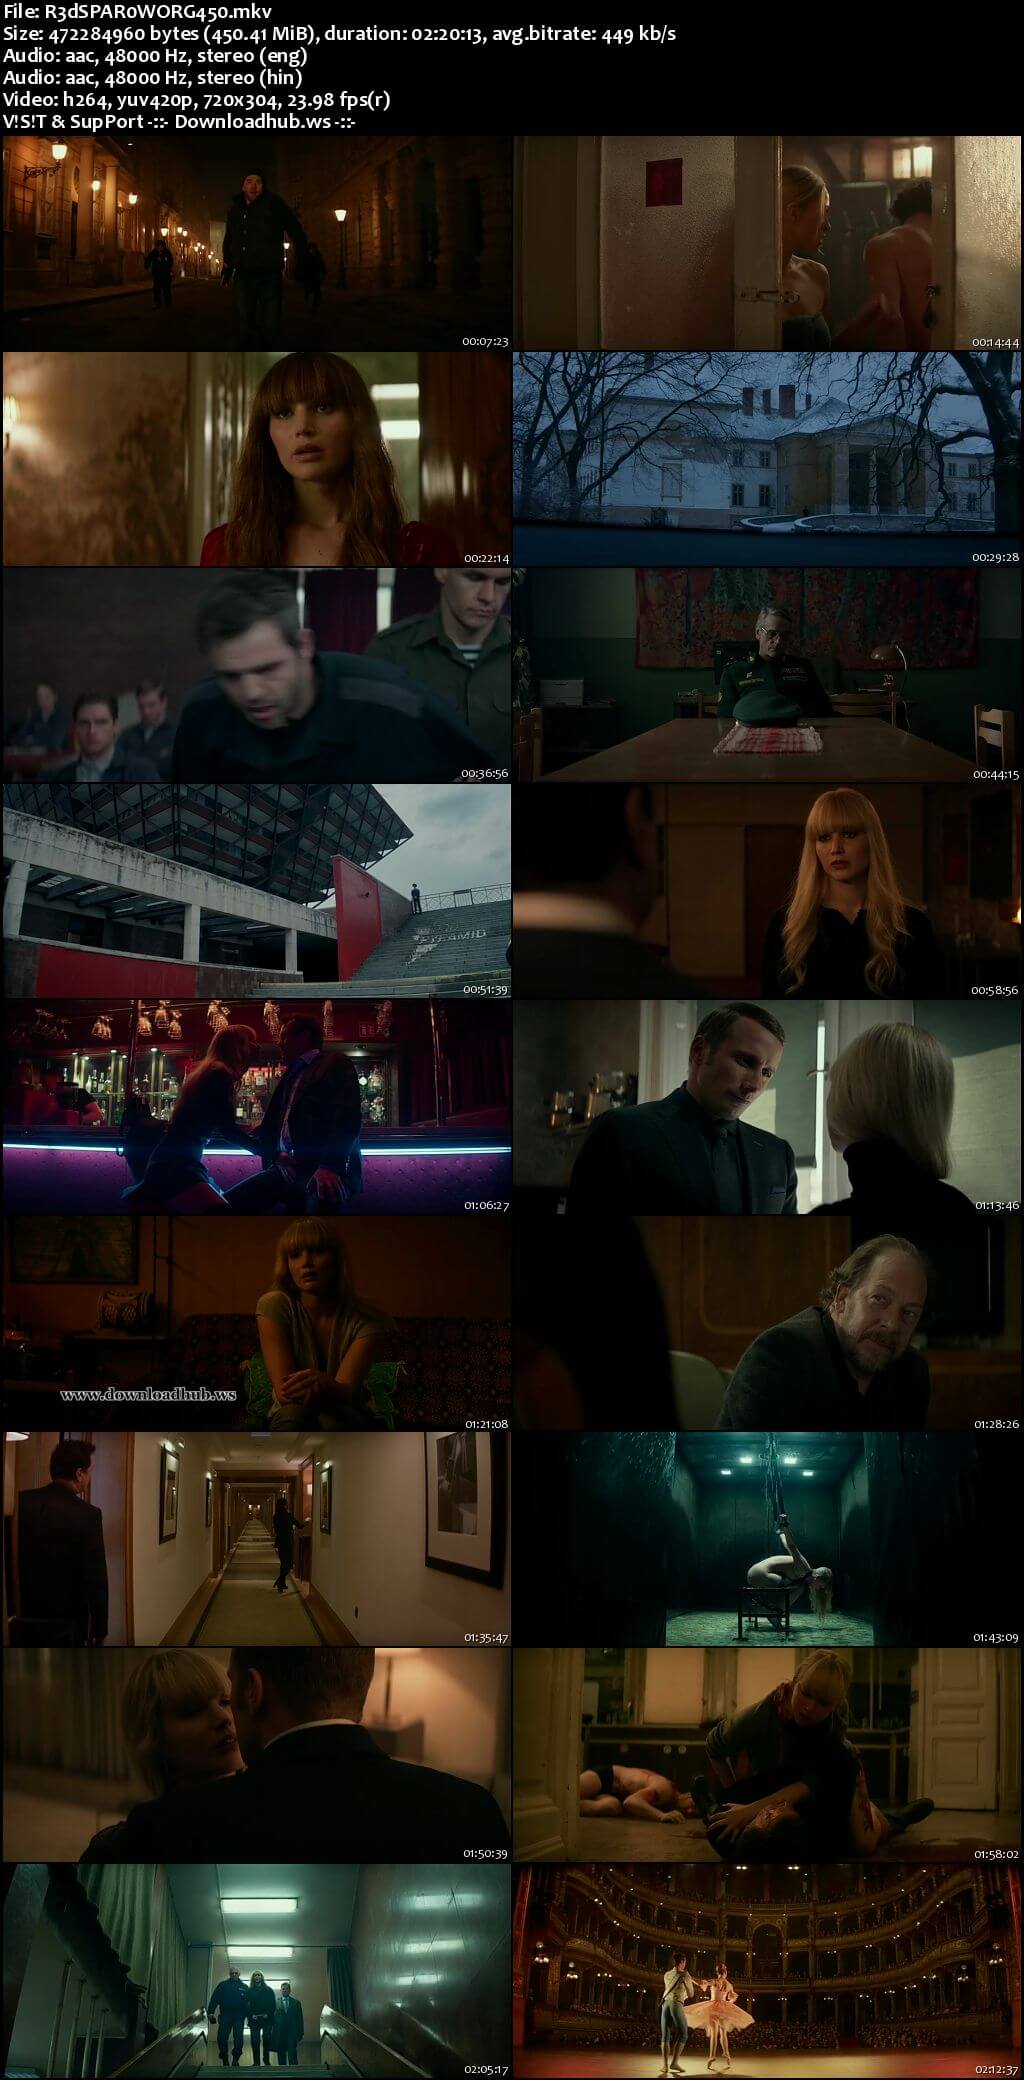 Red Sparrow 2018 Hindi Dual Audio 480p BluRay Free Download